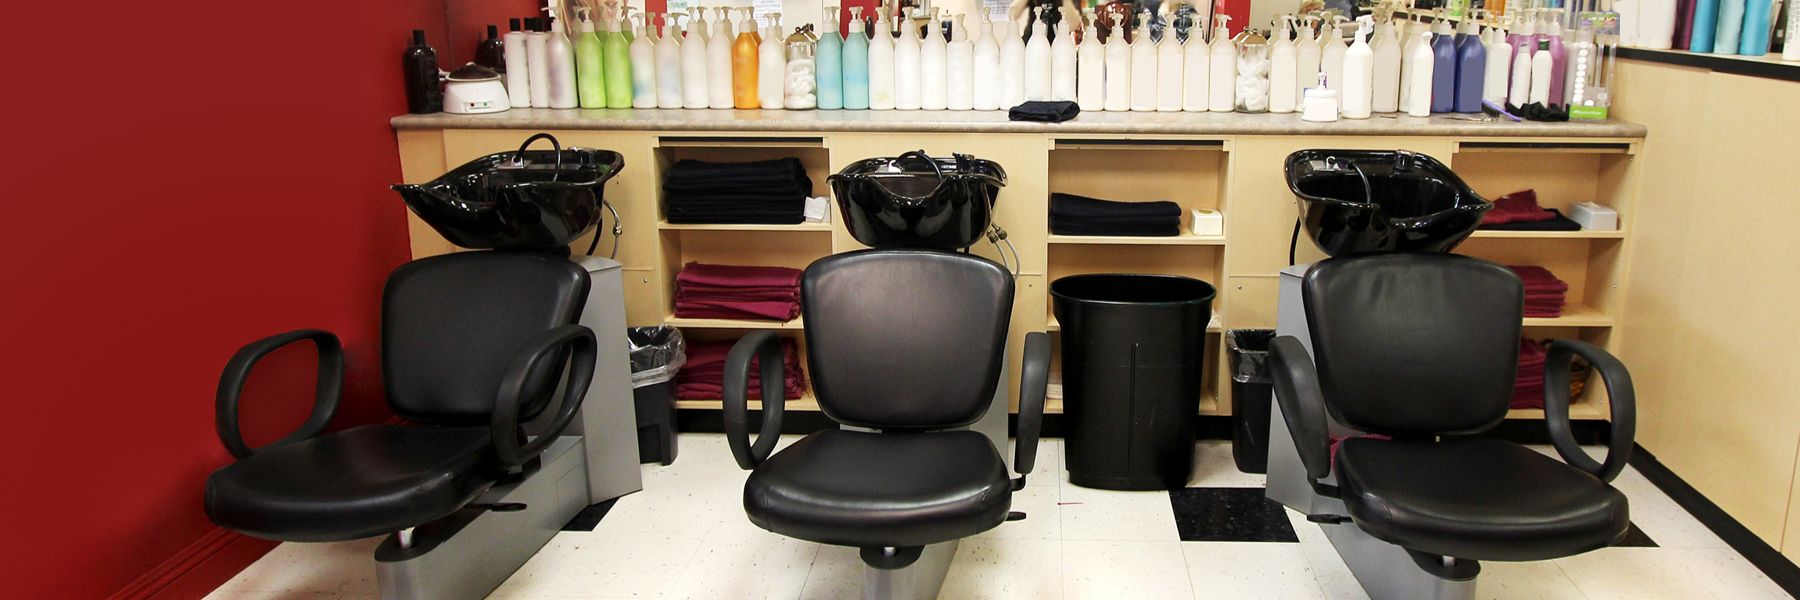 Pricing Strategies for Hair Salons: How to Determine the Right Prices for Your Products